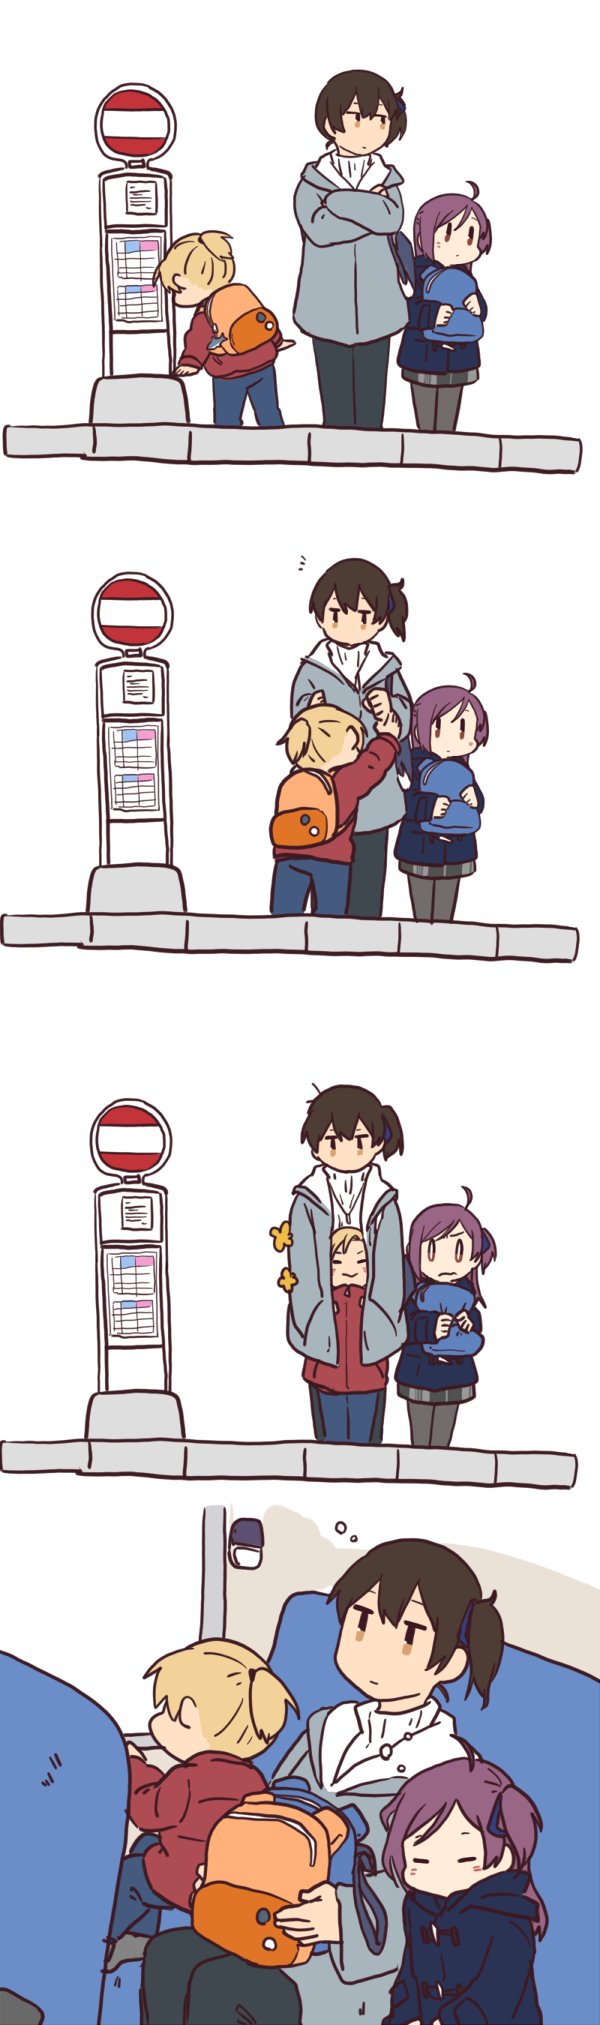 backpack bag betchan brown_hair bus_interior bus_stop casual coat comic commentary_request denim hagikaze_(kantai_collection) highres jacket jeans kaga_(kantai_collection) kantai_collection long_hair maikaze_(kantai_collection) multiple_girls pants ponytail purple_hair road_sign short_hair sign